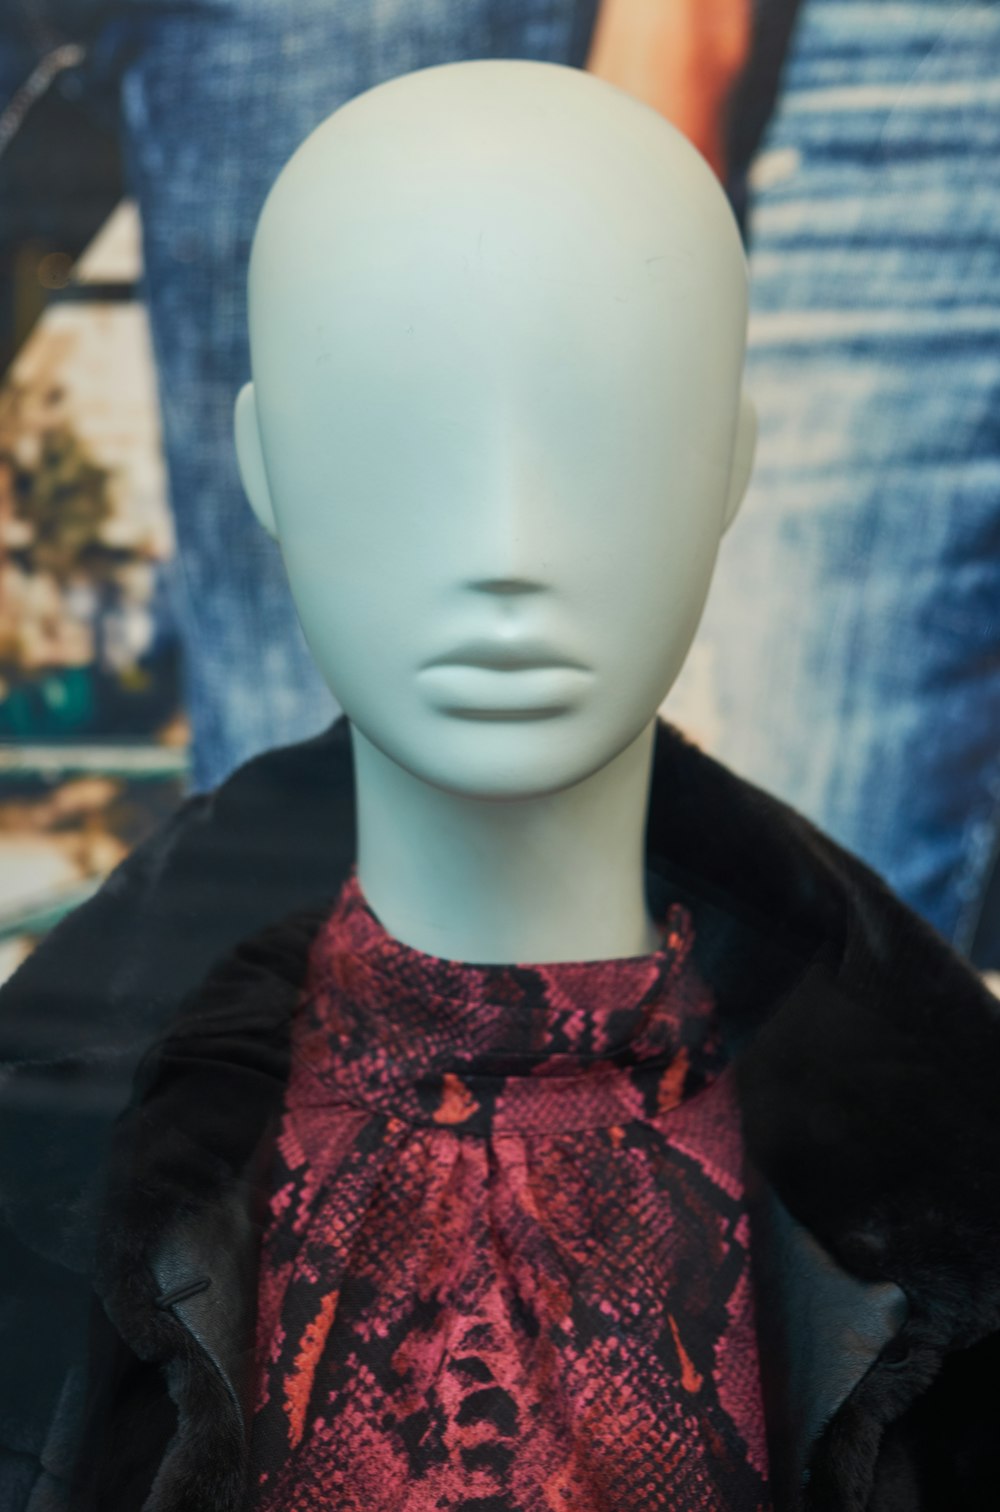 mannequin wearing black and red tops